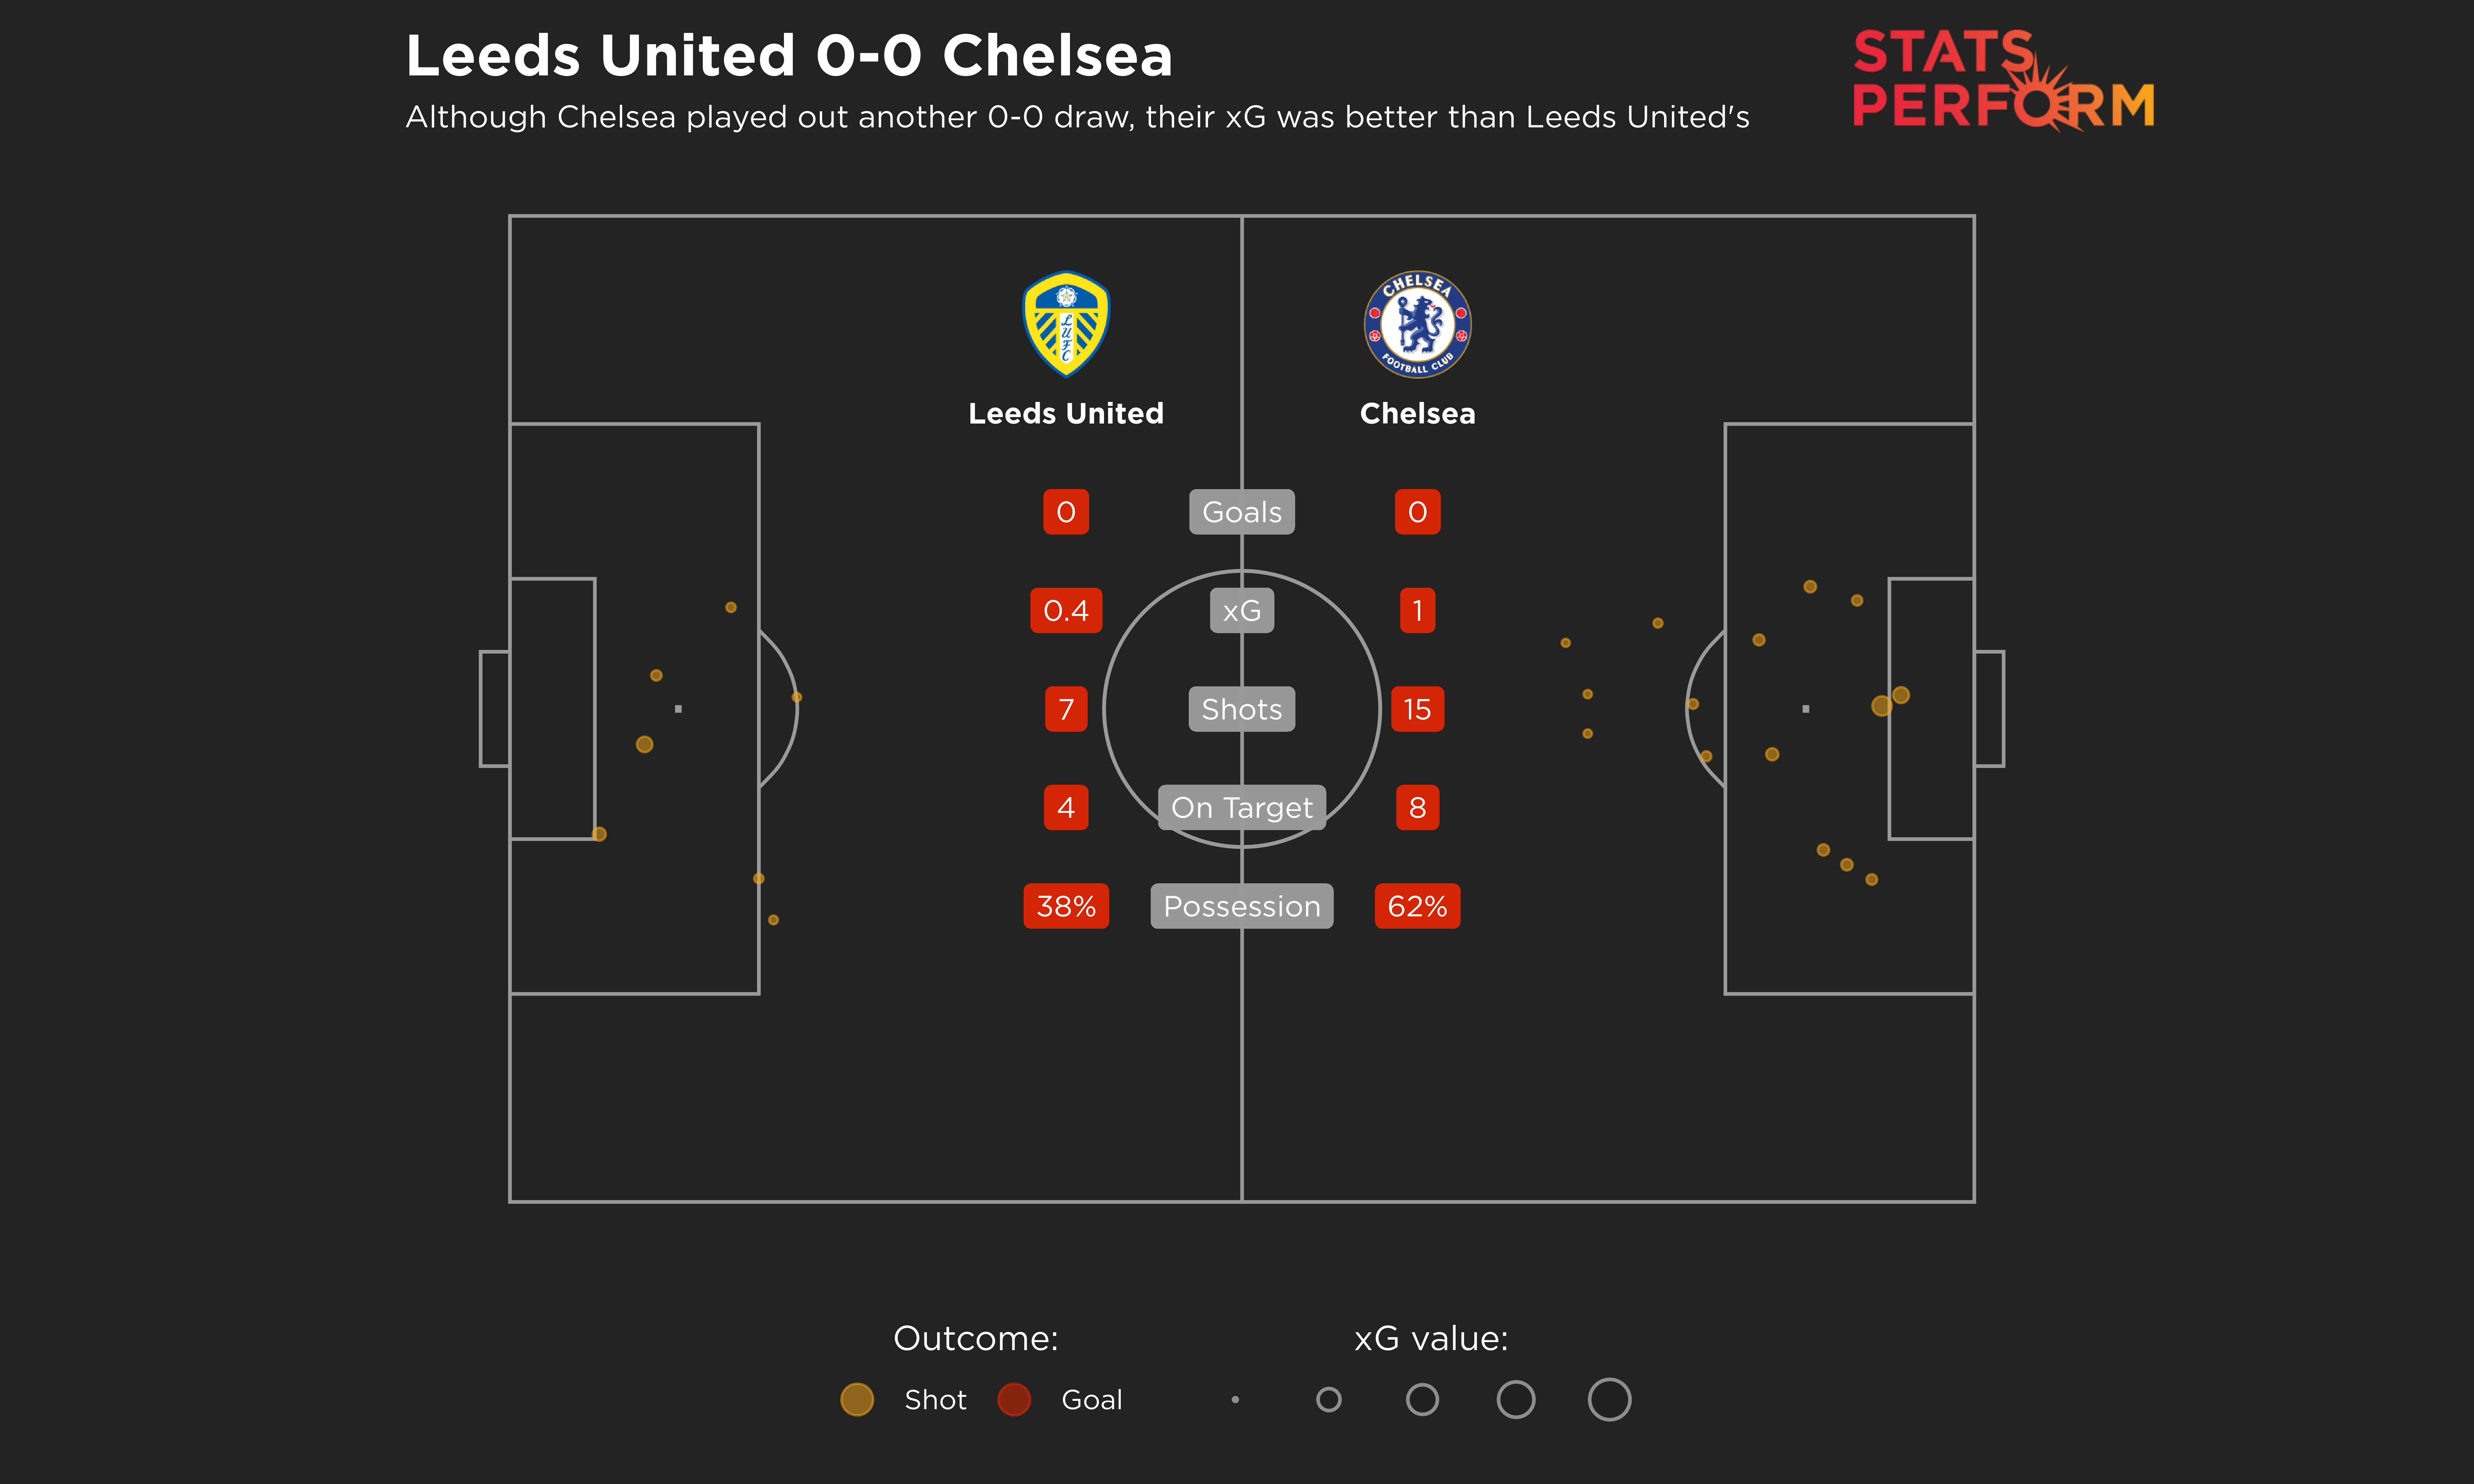 Chelsea could not find a way past Leeds United, but they did create the better chances